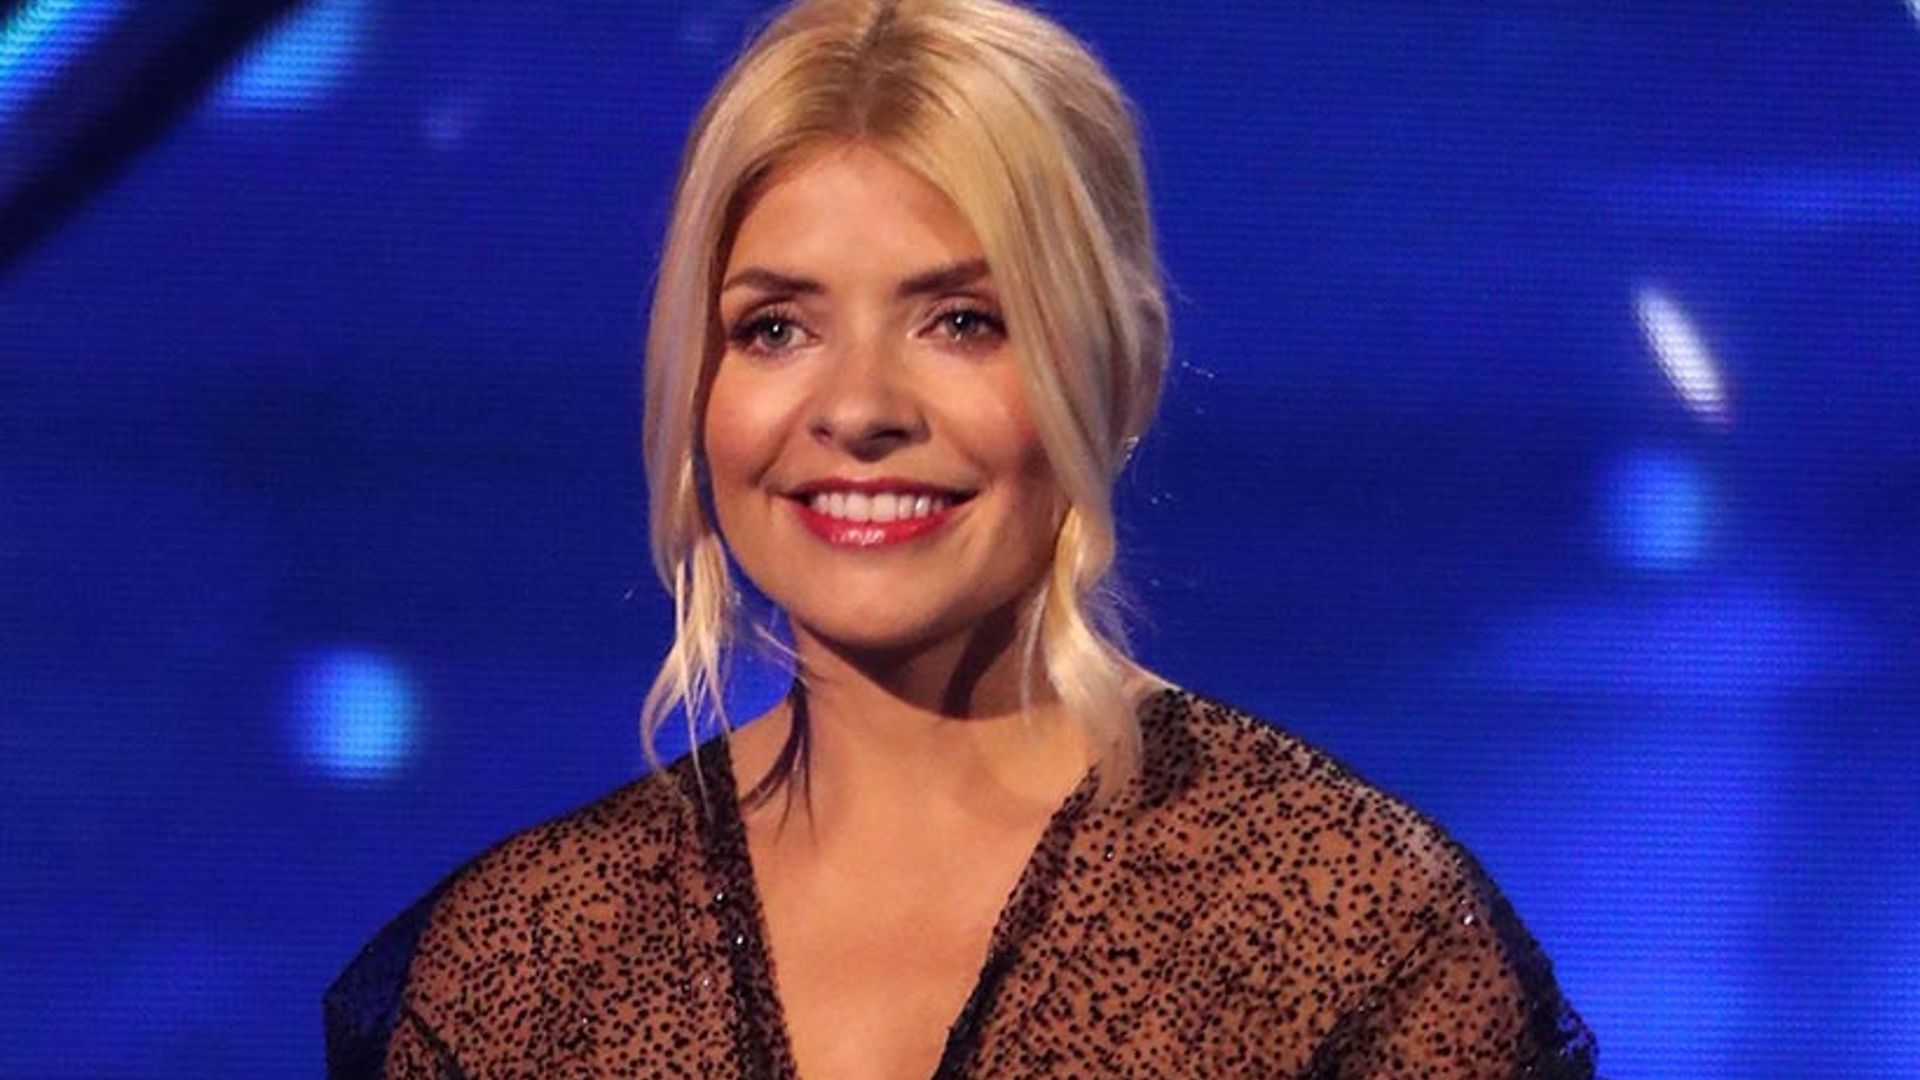 Holly Willoughby’s Dancing On Ice dress has the Internet in a frenzy